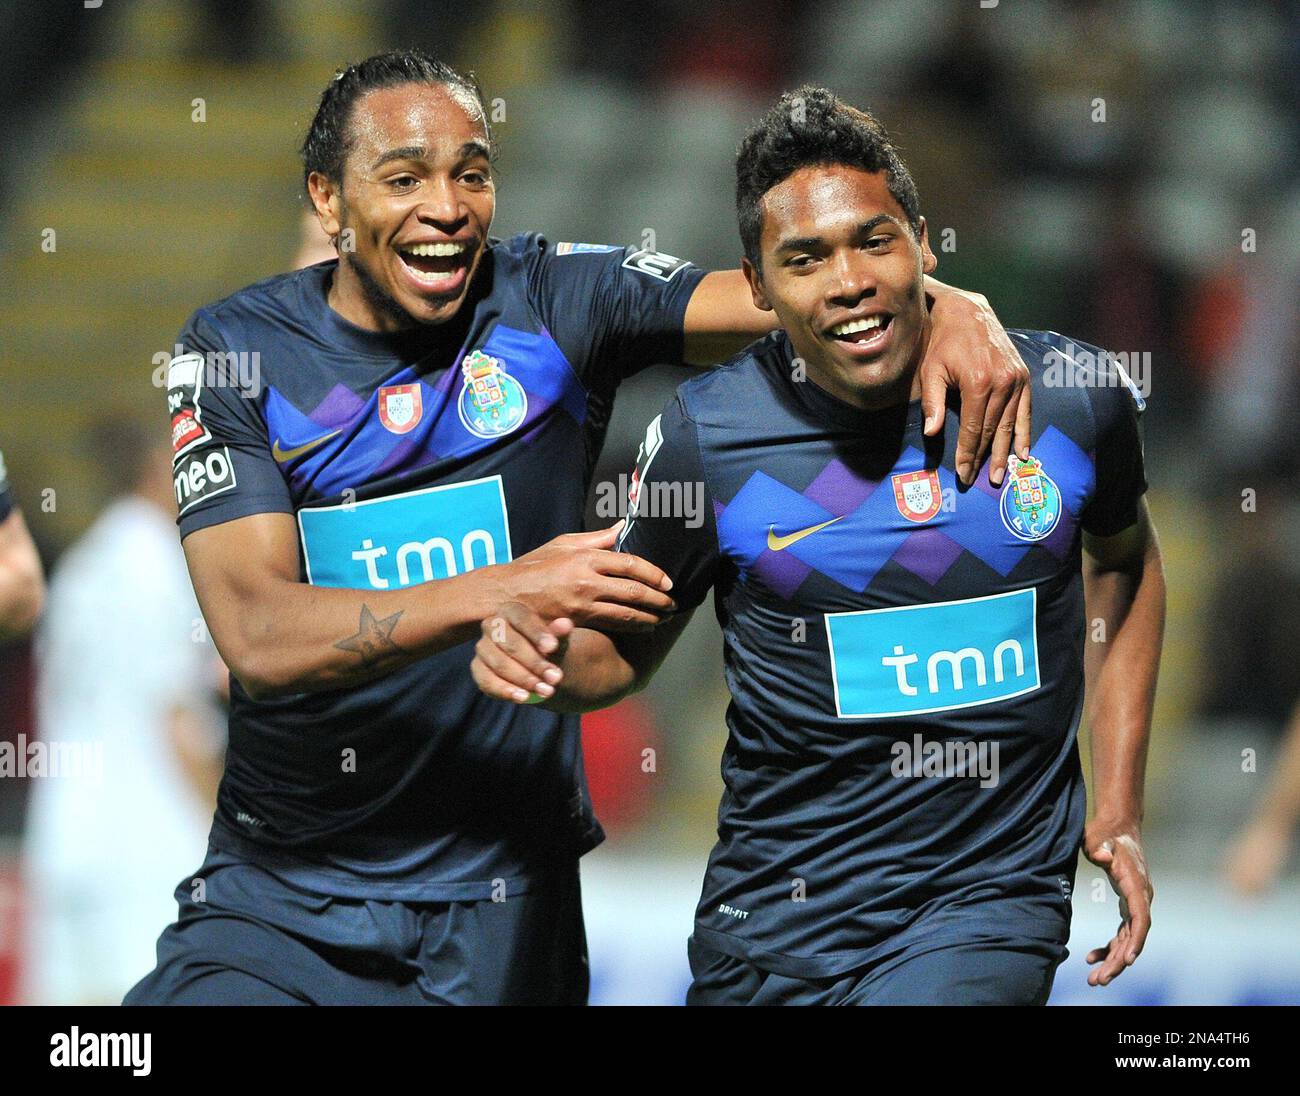 FC Porto's Alex Sandro, right, from Brazil celebrates with Alvaro Pereira,  from Uruguay, after scoring his team second goal against Nacional during  their Portuguese League soccer match at Nacional's stadium outside Funchal,